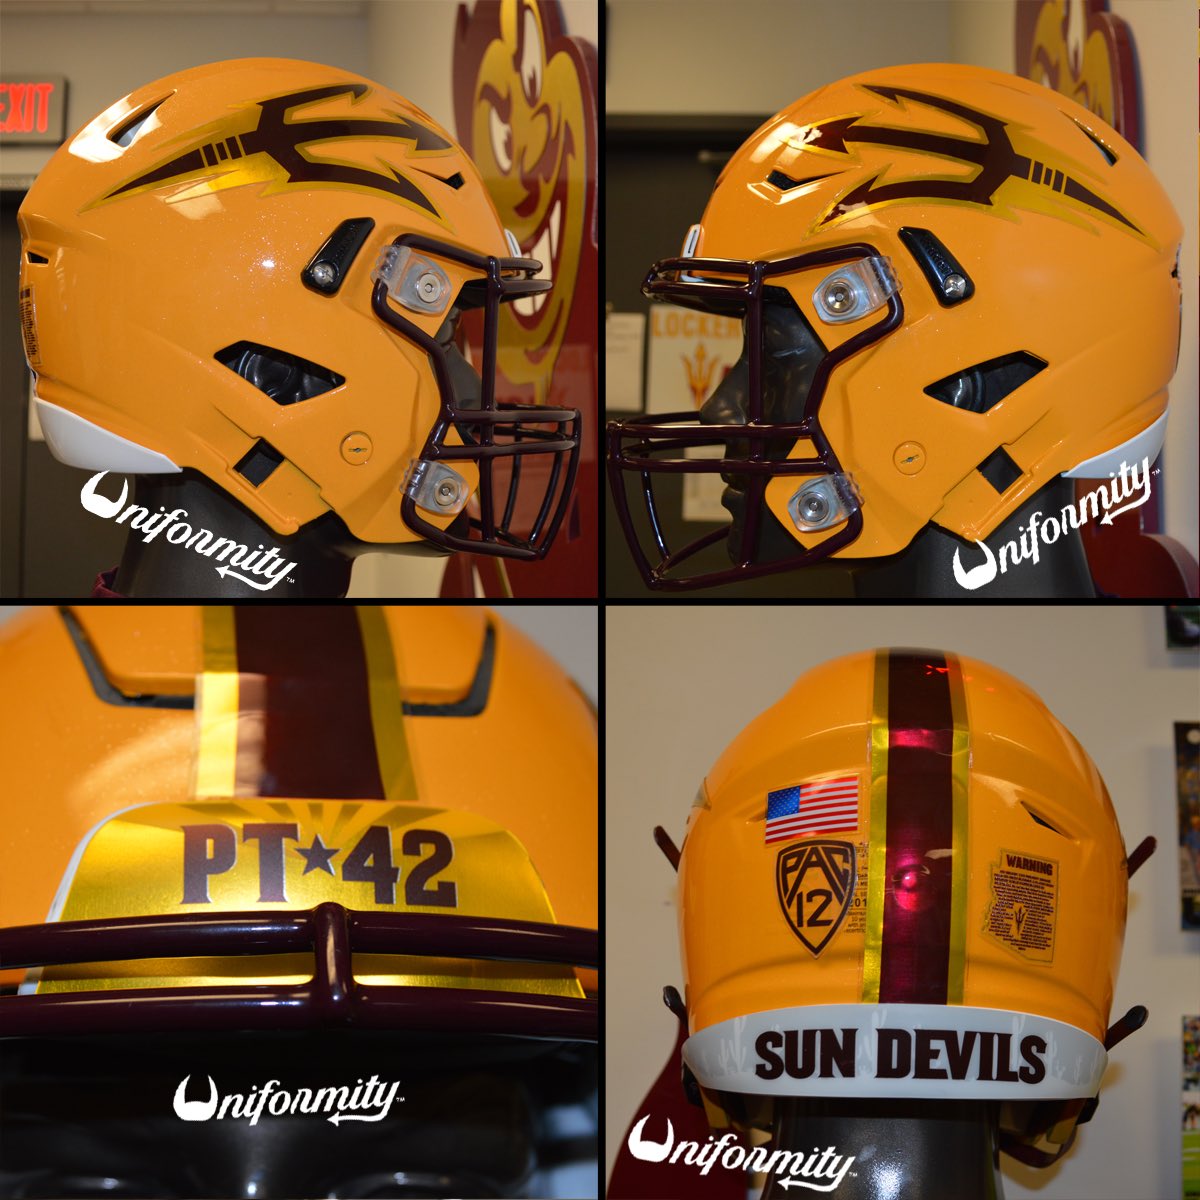 🚨2022 Uniformity - Week 1: Sun Devils Wear Traditional Colors for Season Opener🚨 The first full week of college football is upon us & @ASUFootball is opening it up against NAU this Thursday. Take a look at their classic look on @DevilsDigest here: arizonastate.rivals.com/news/2022-unif…